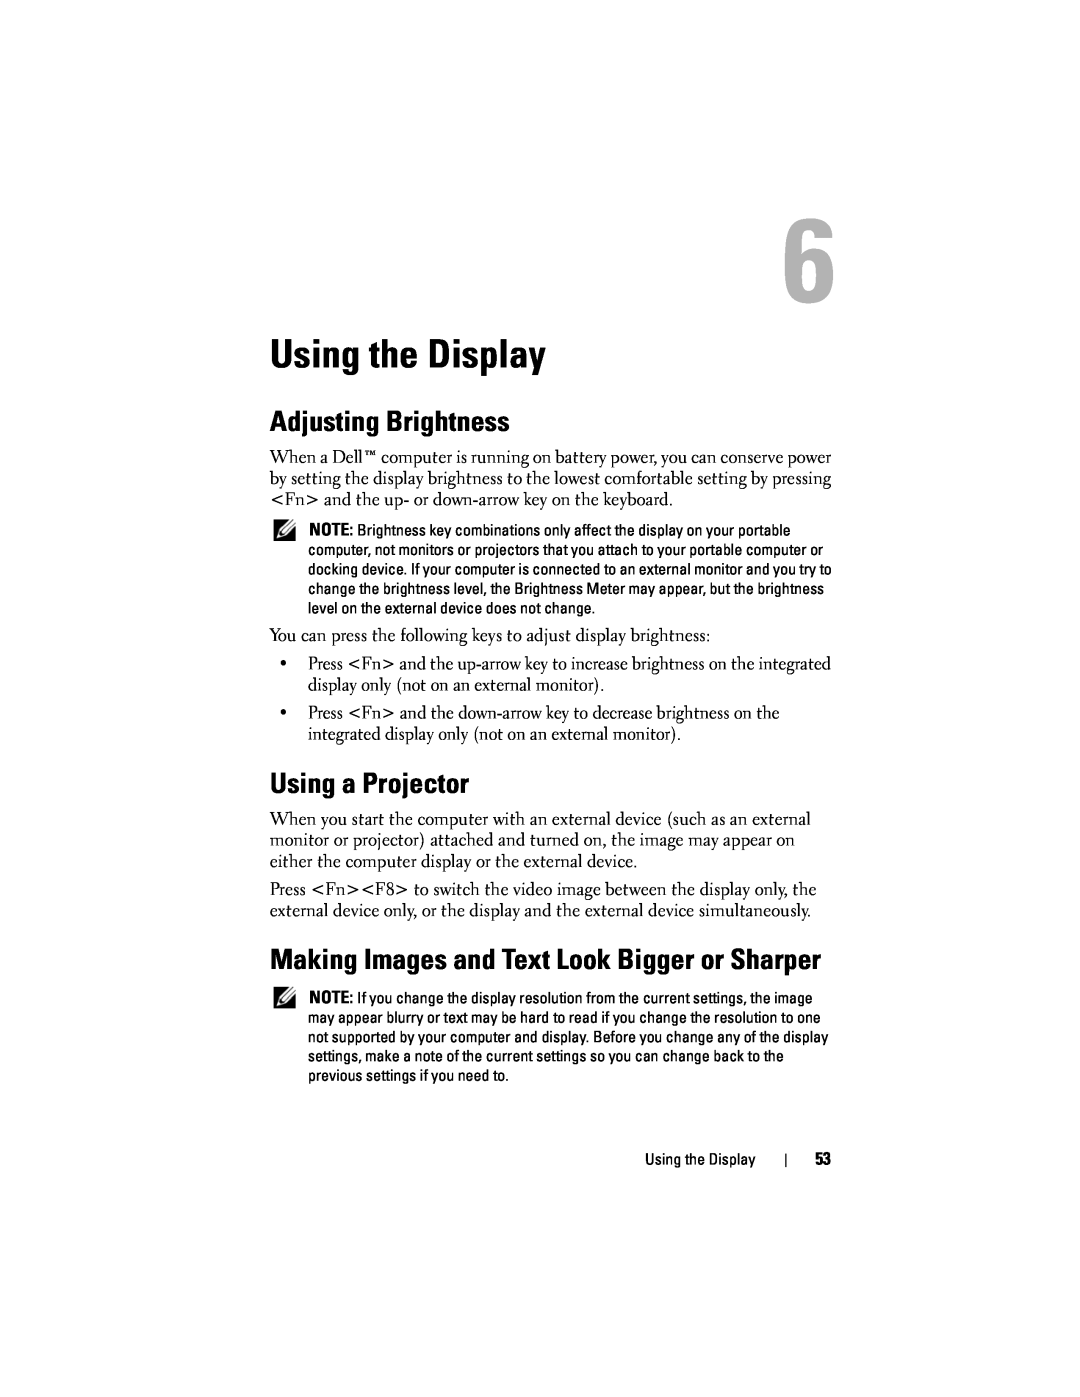 Dell D530 manual Using the Display, Adjusting Brightness, Using a Projector, Making Images and Text Look Bigger or Sharper 